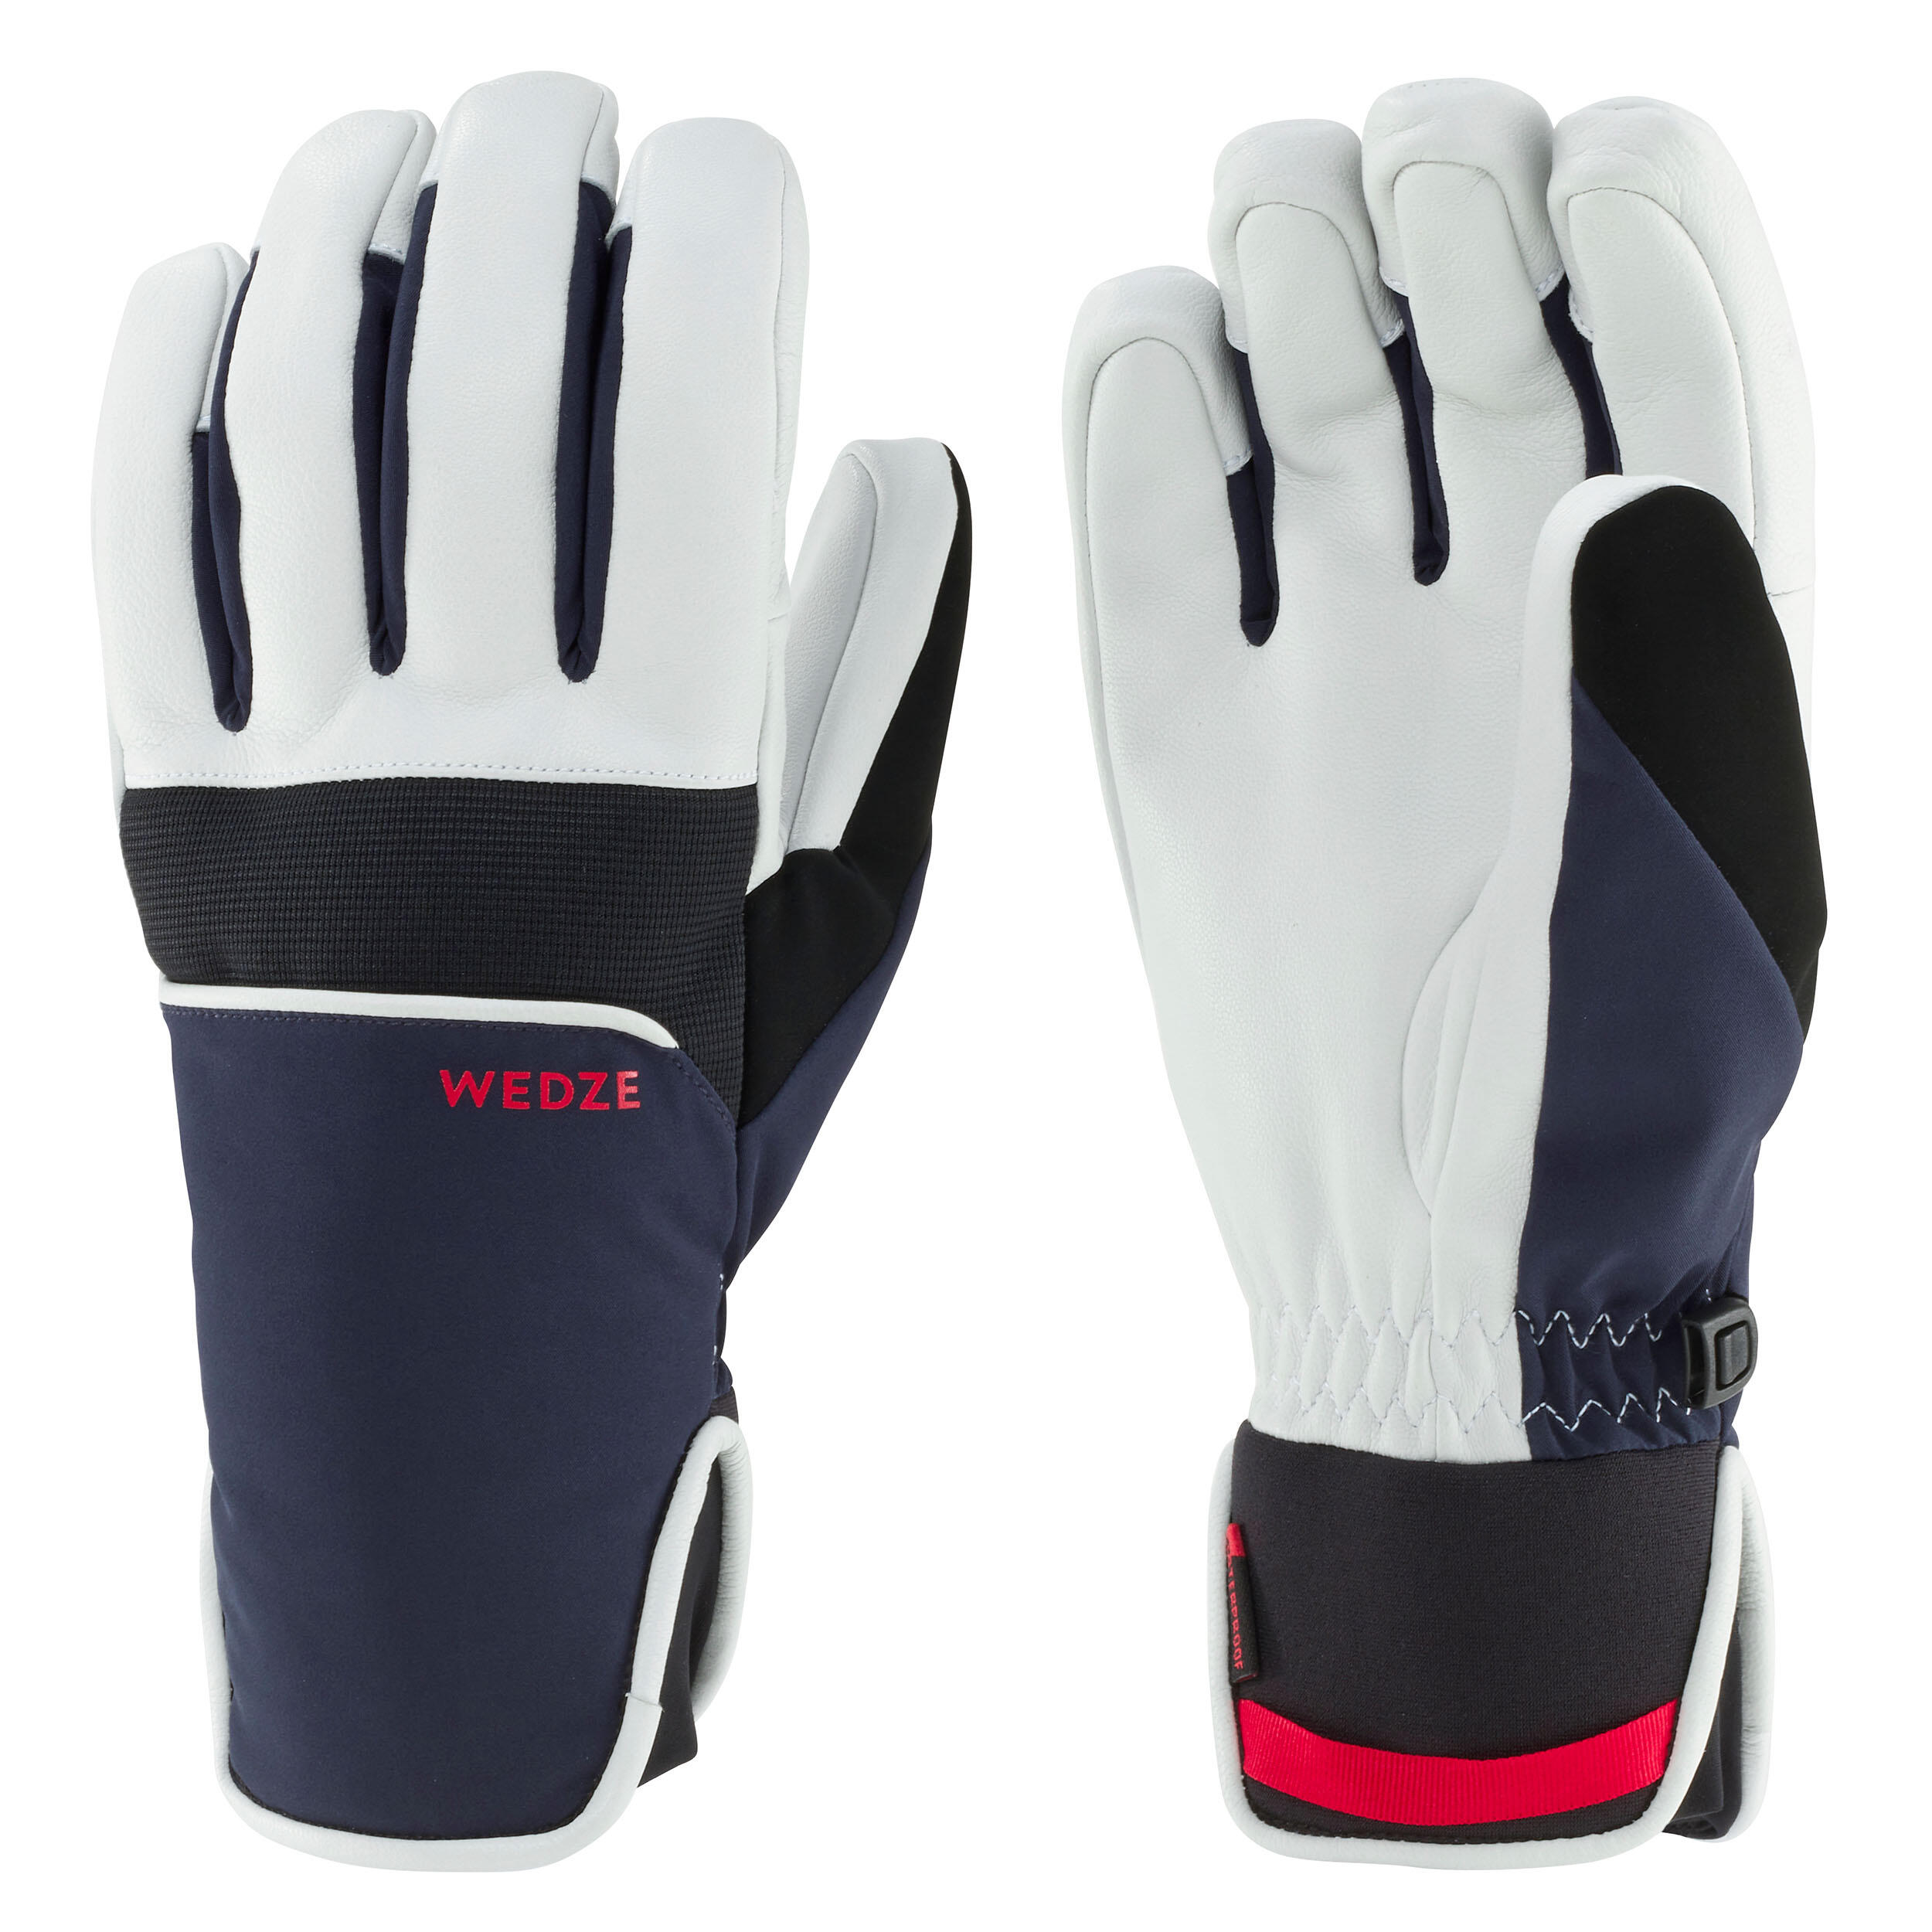 Women's Snowboard Mittens and Gloves